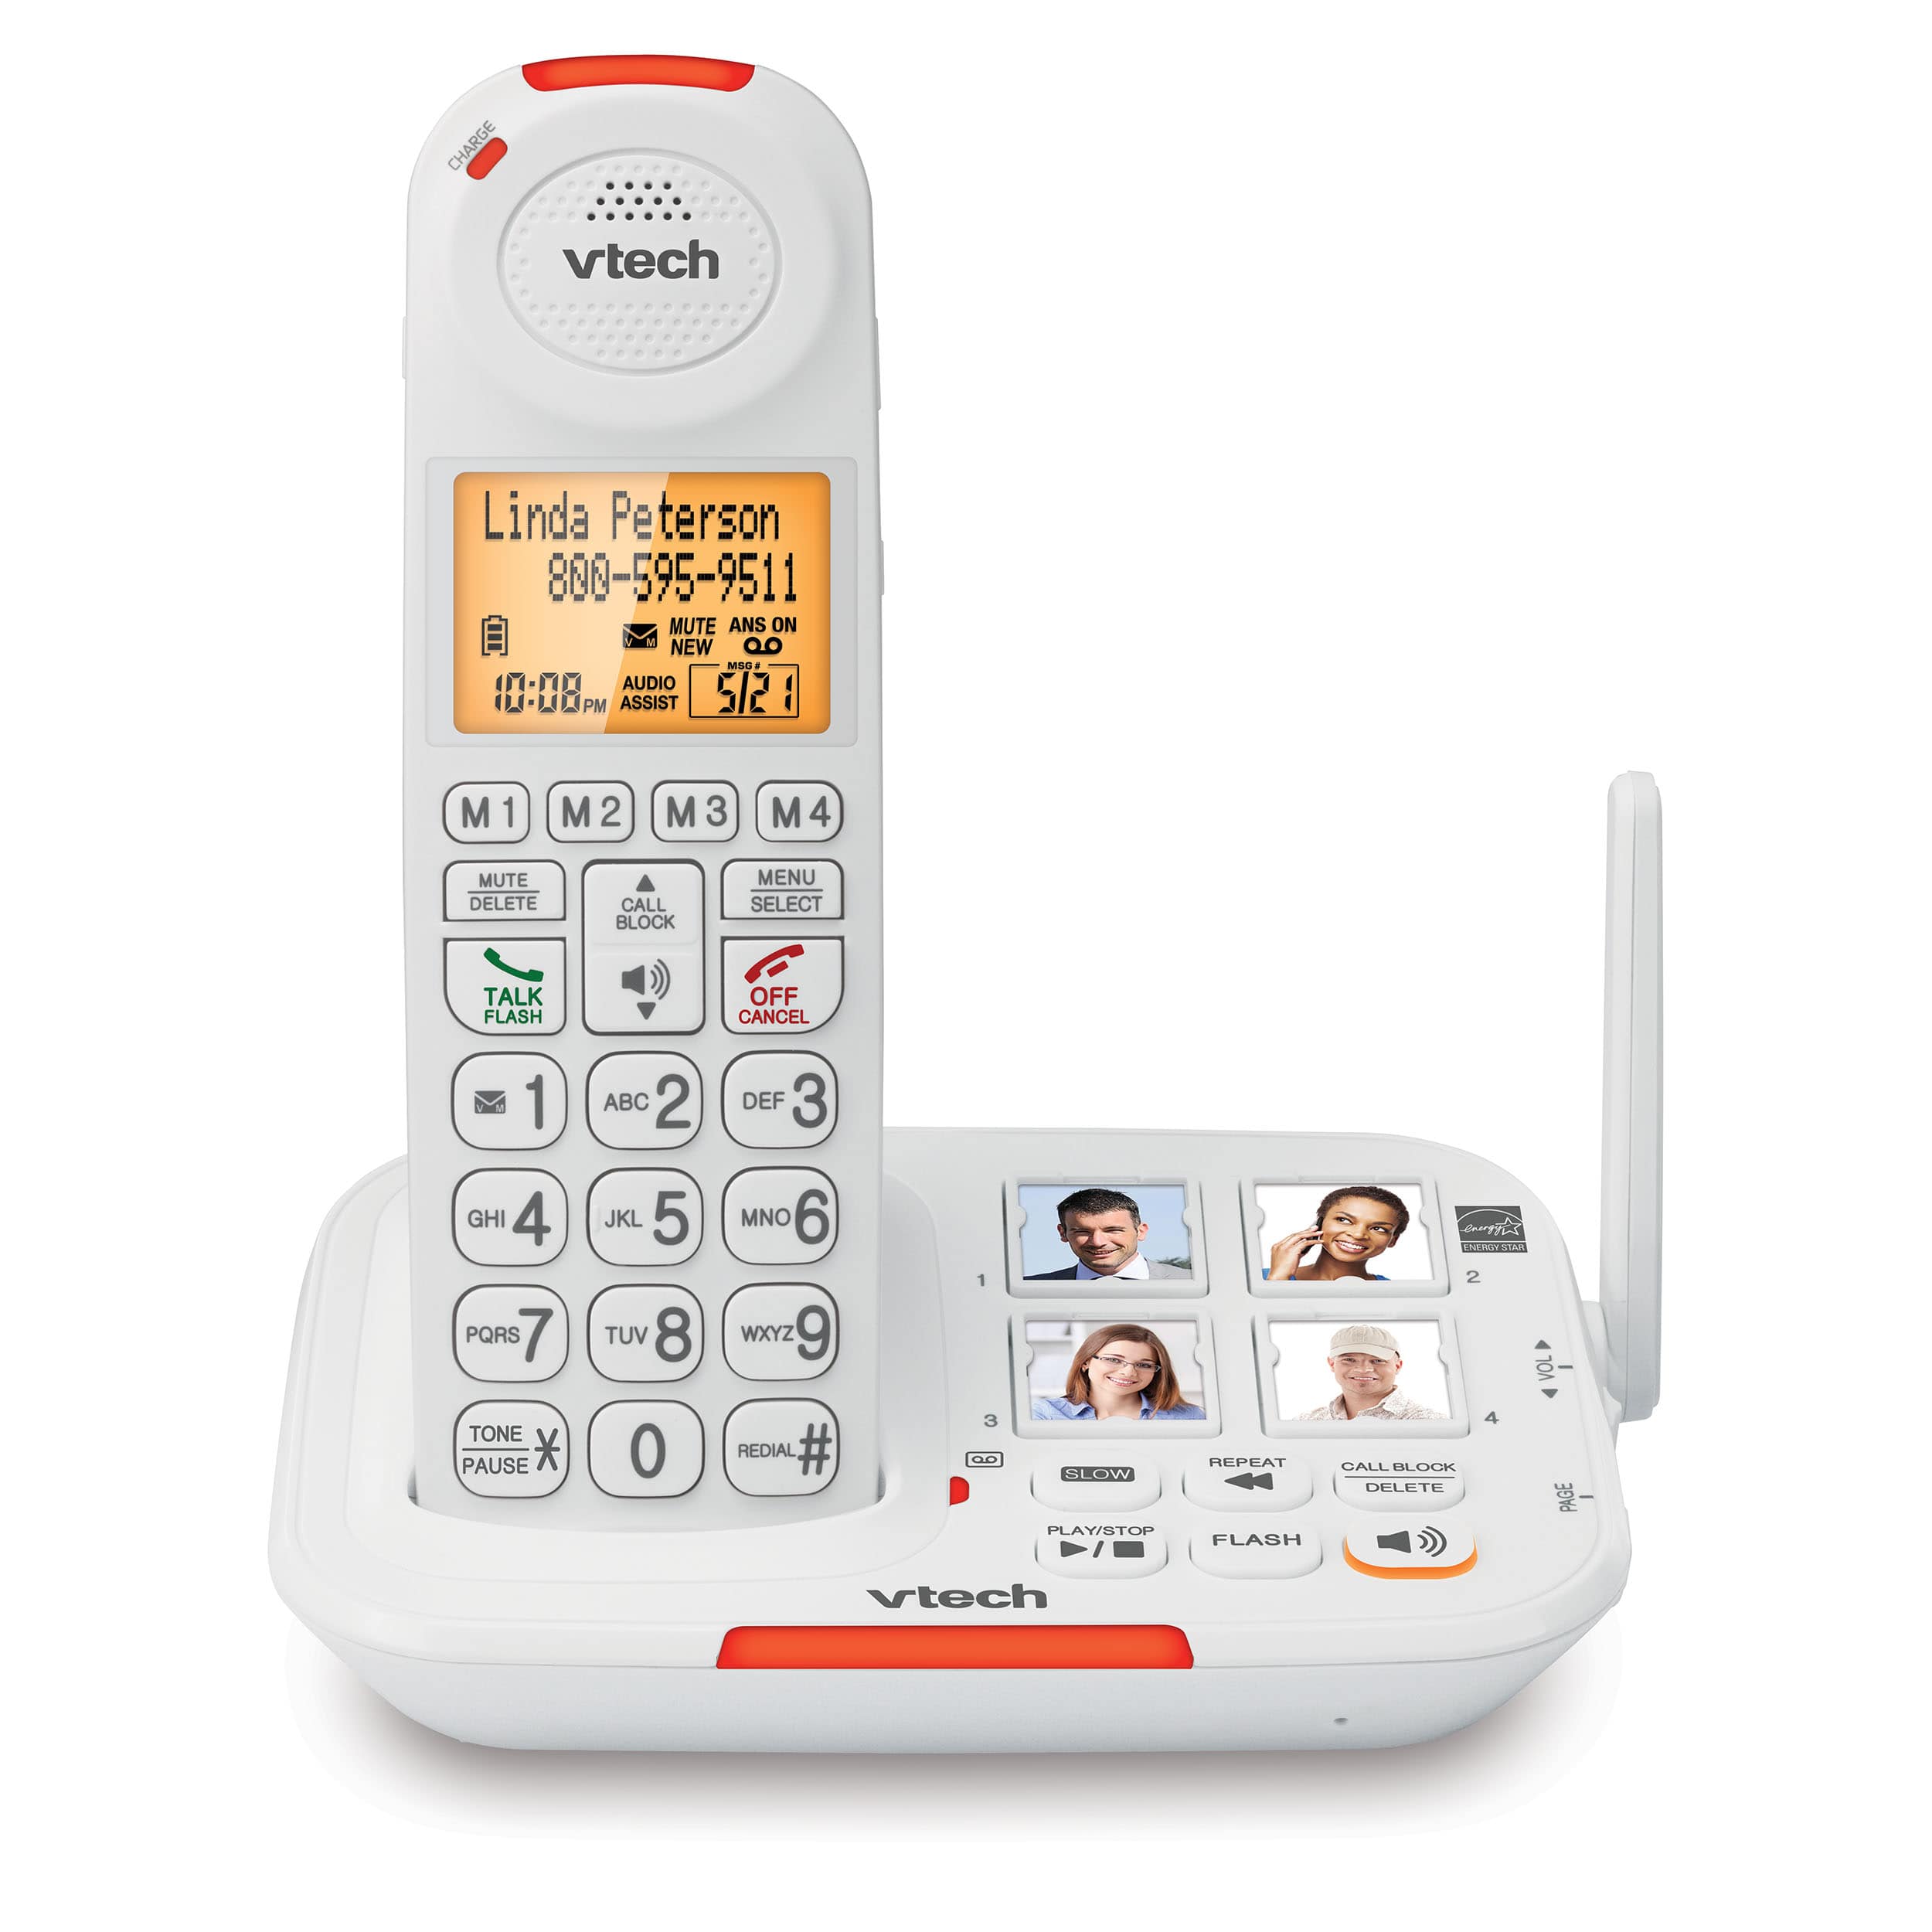 Amplified Cordless Phone with Answering System, Big Buttons, Extra-Loud Ringer & Smart Call Blocker - view 1